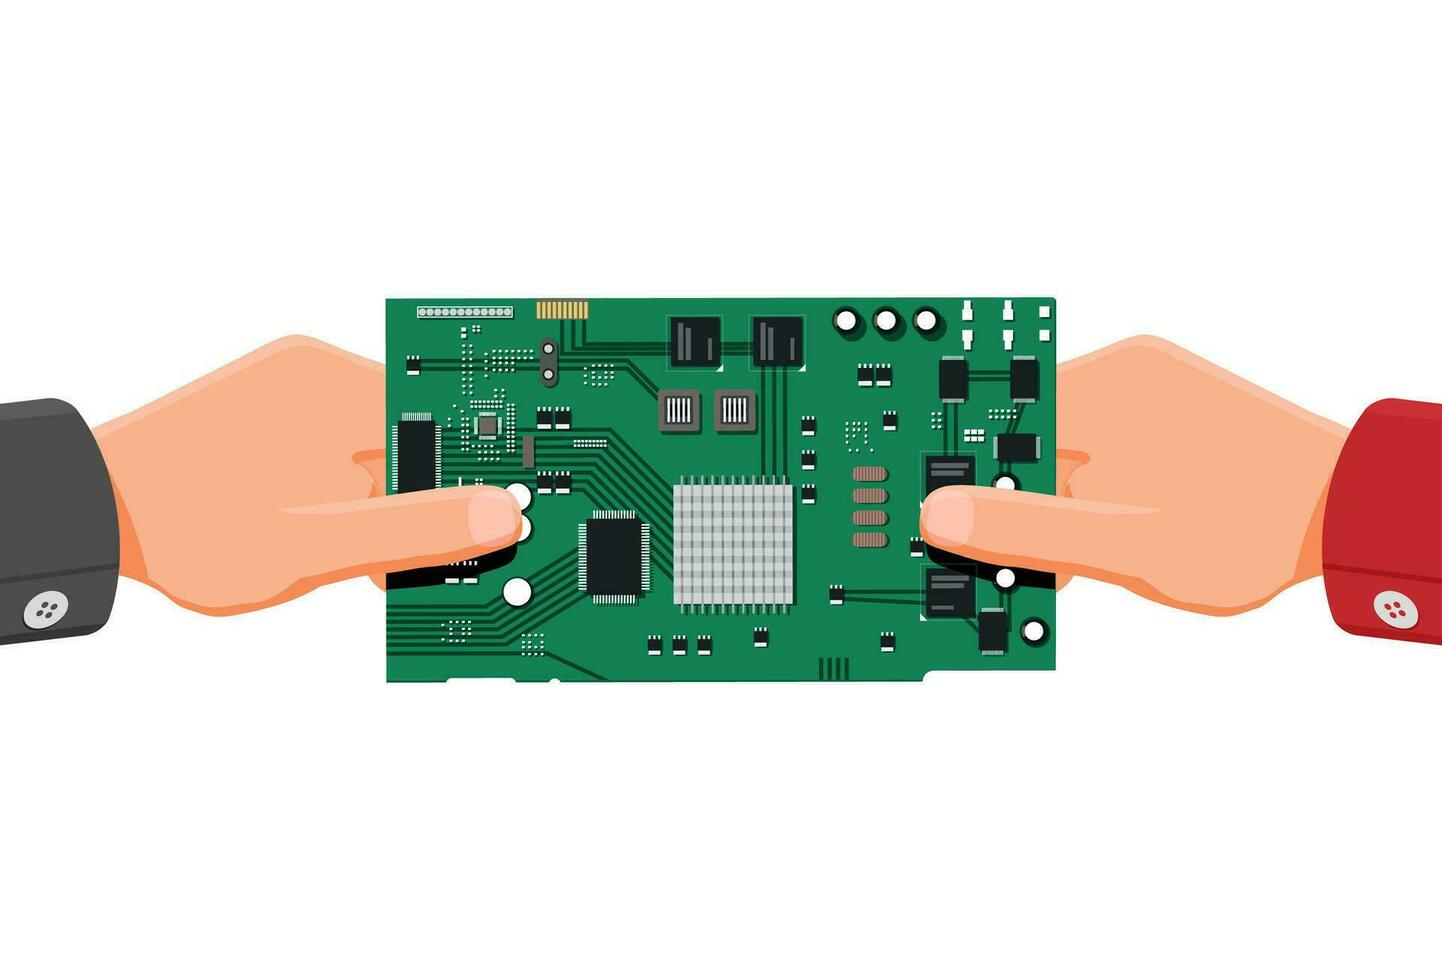 Buyer Hand and CPU Microchip. Concept of Semiconductor Shortage due Coronavirus Pandemic. Problems with Supply Chain of Computer or Electronics Manufacturing. Flat Vector Illustration